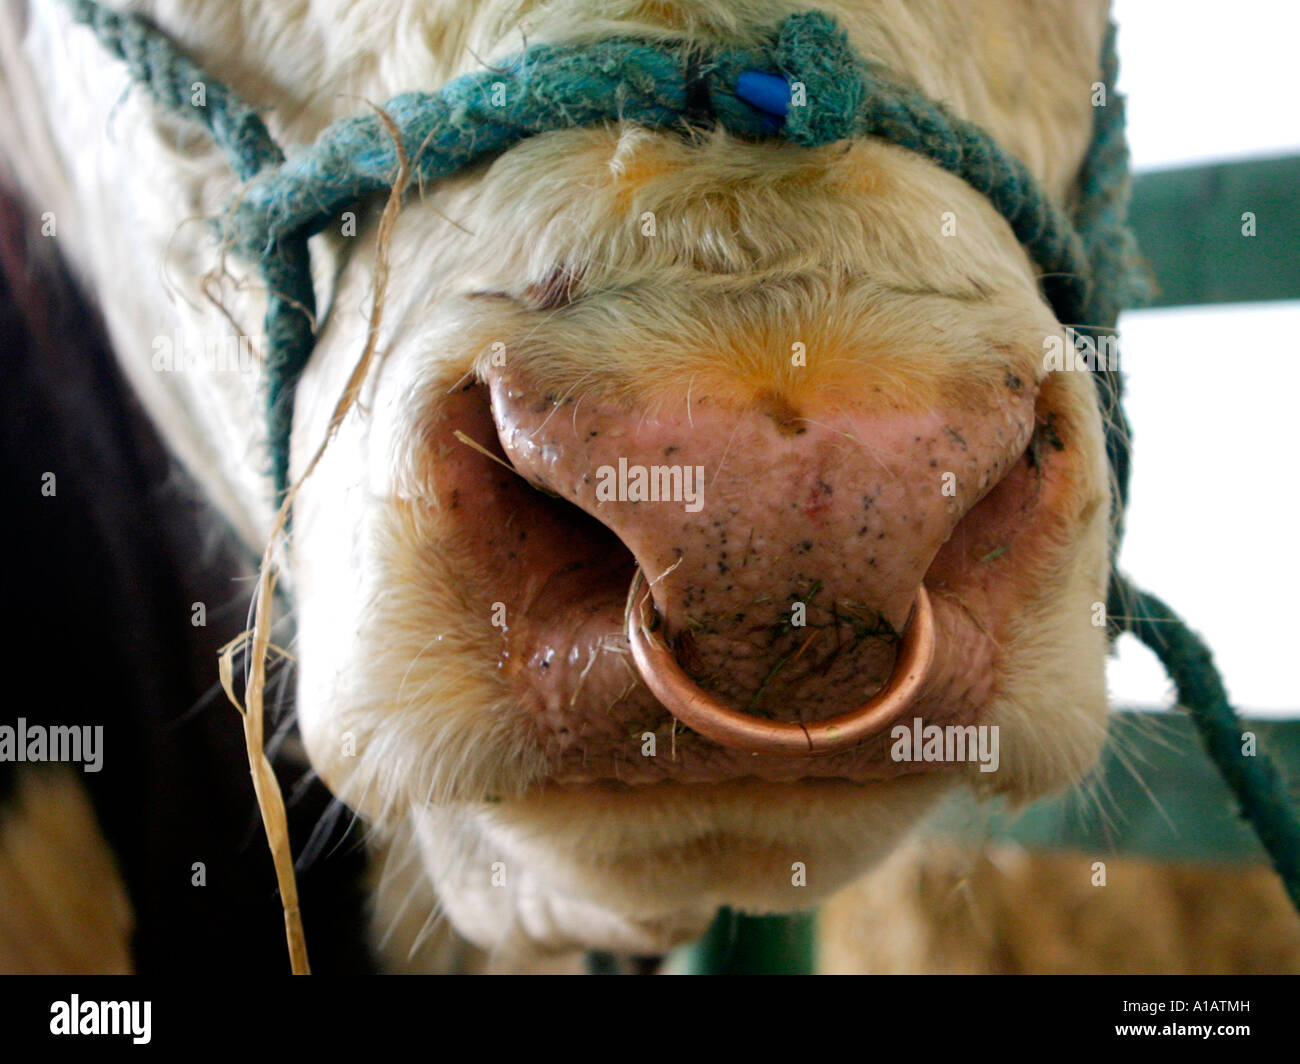 A bull nose with a nose ring Stock Photo - Alamy